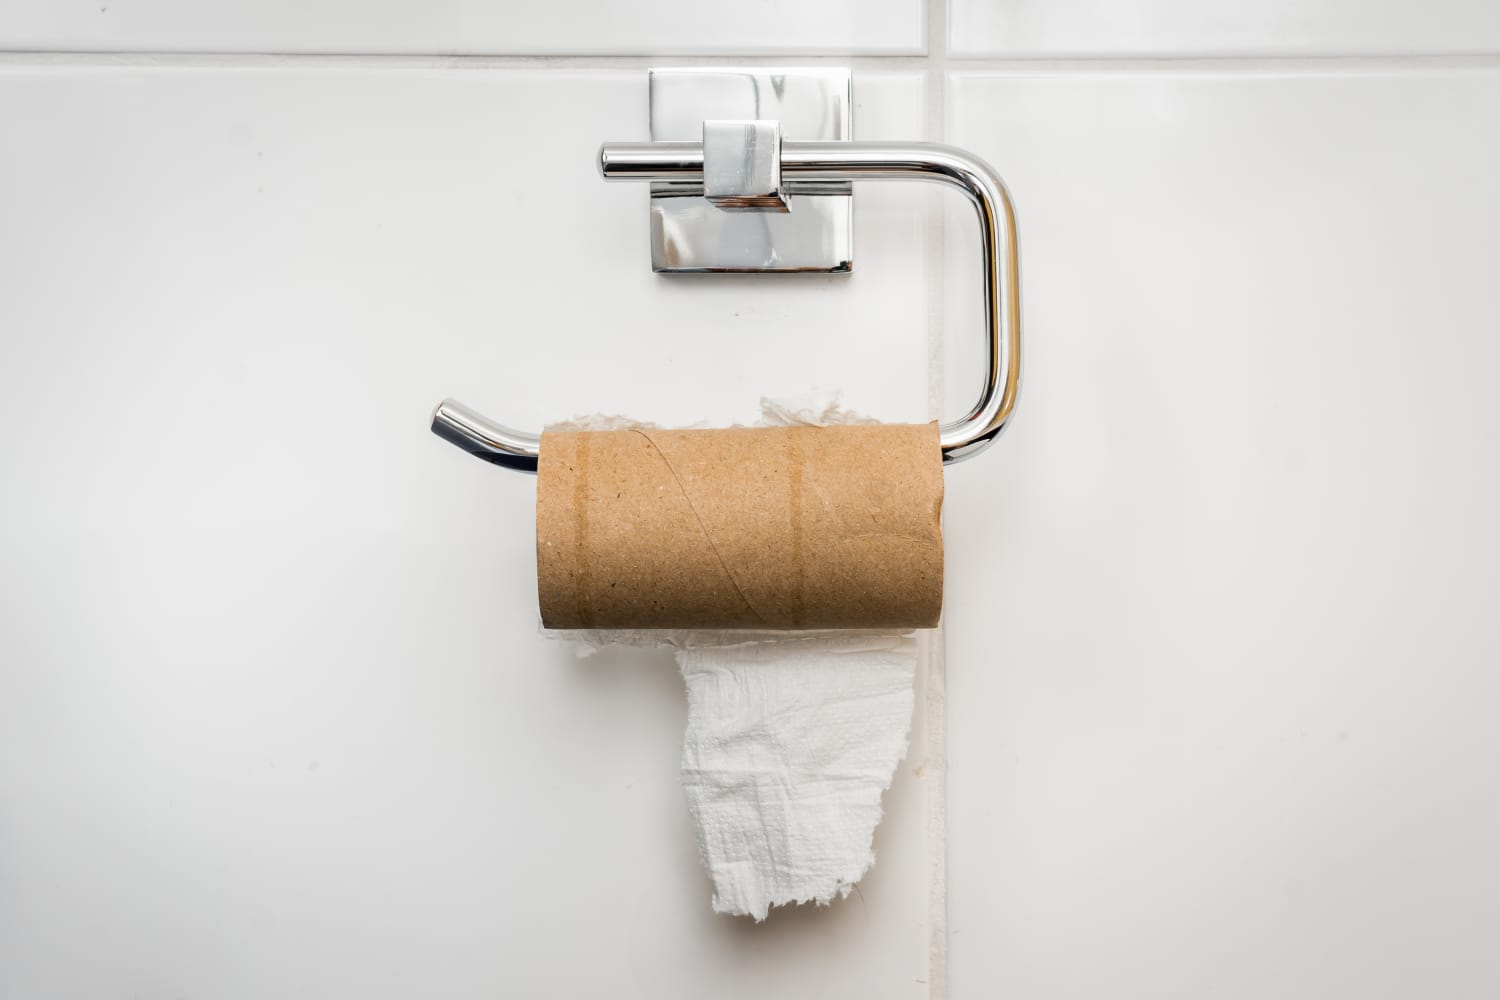 Bamboo Toilet Paper Is Better For Your Bum and the Planet